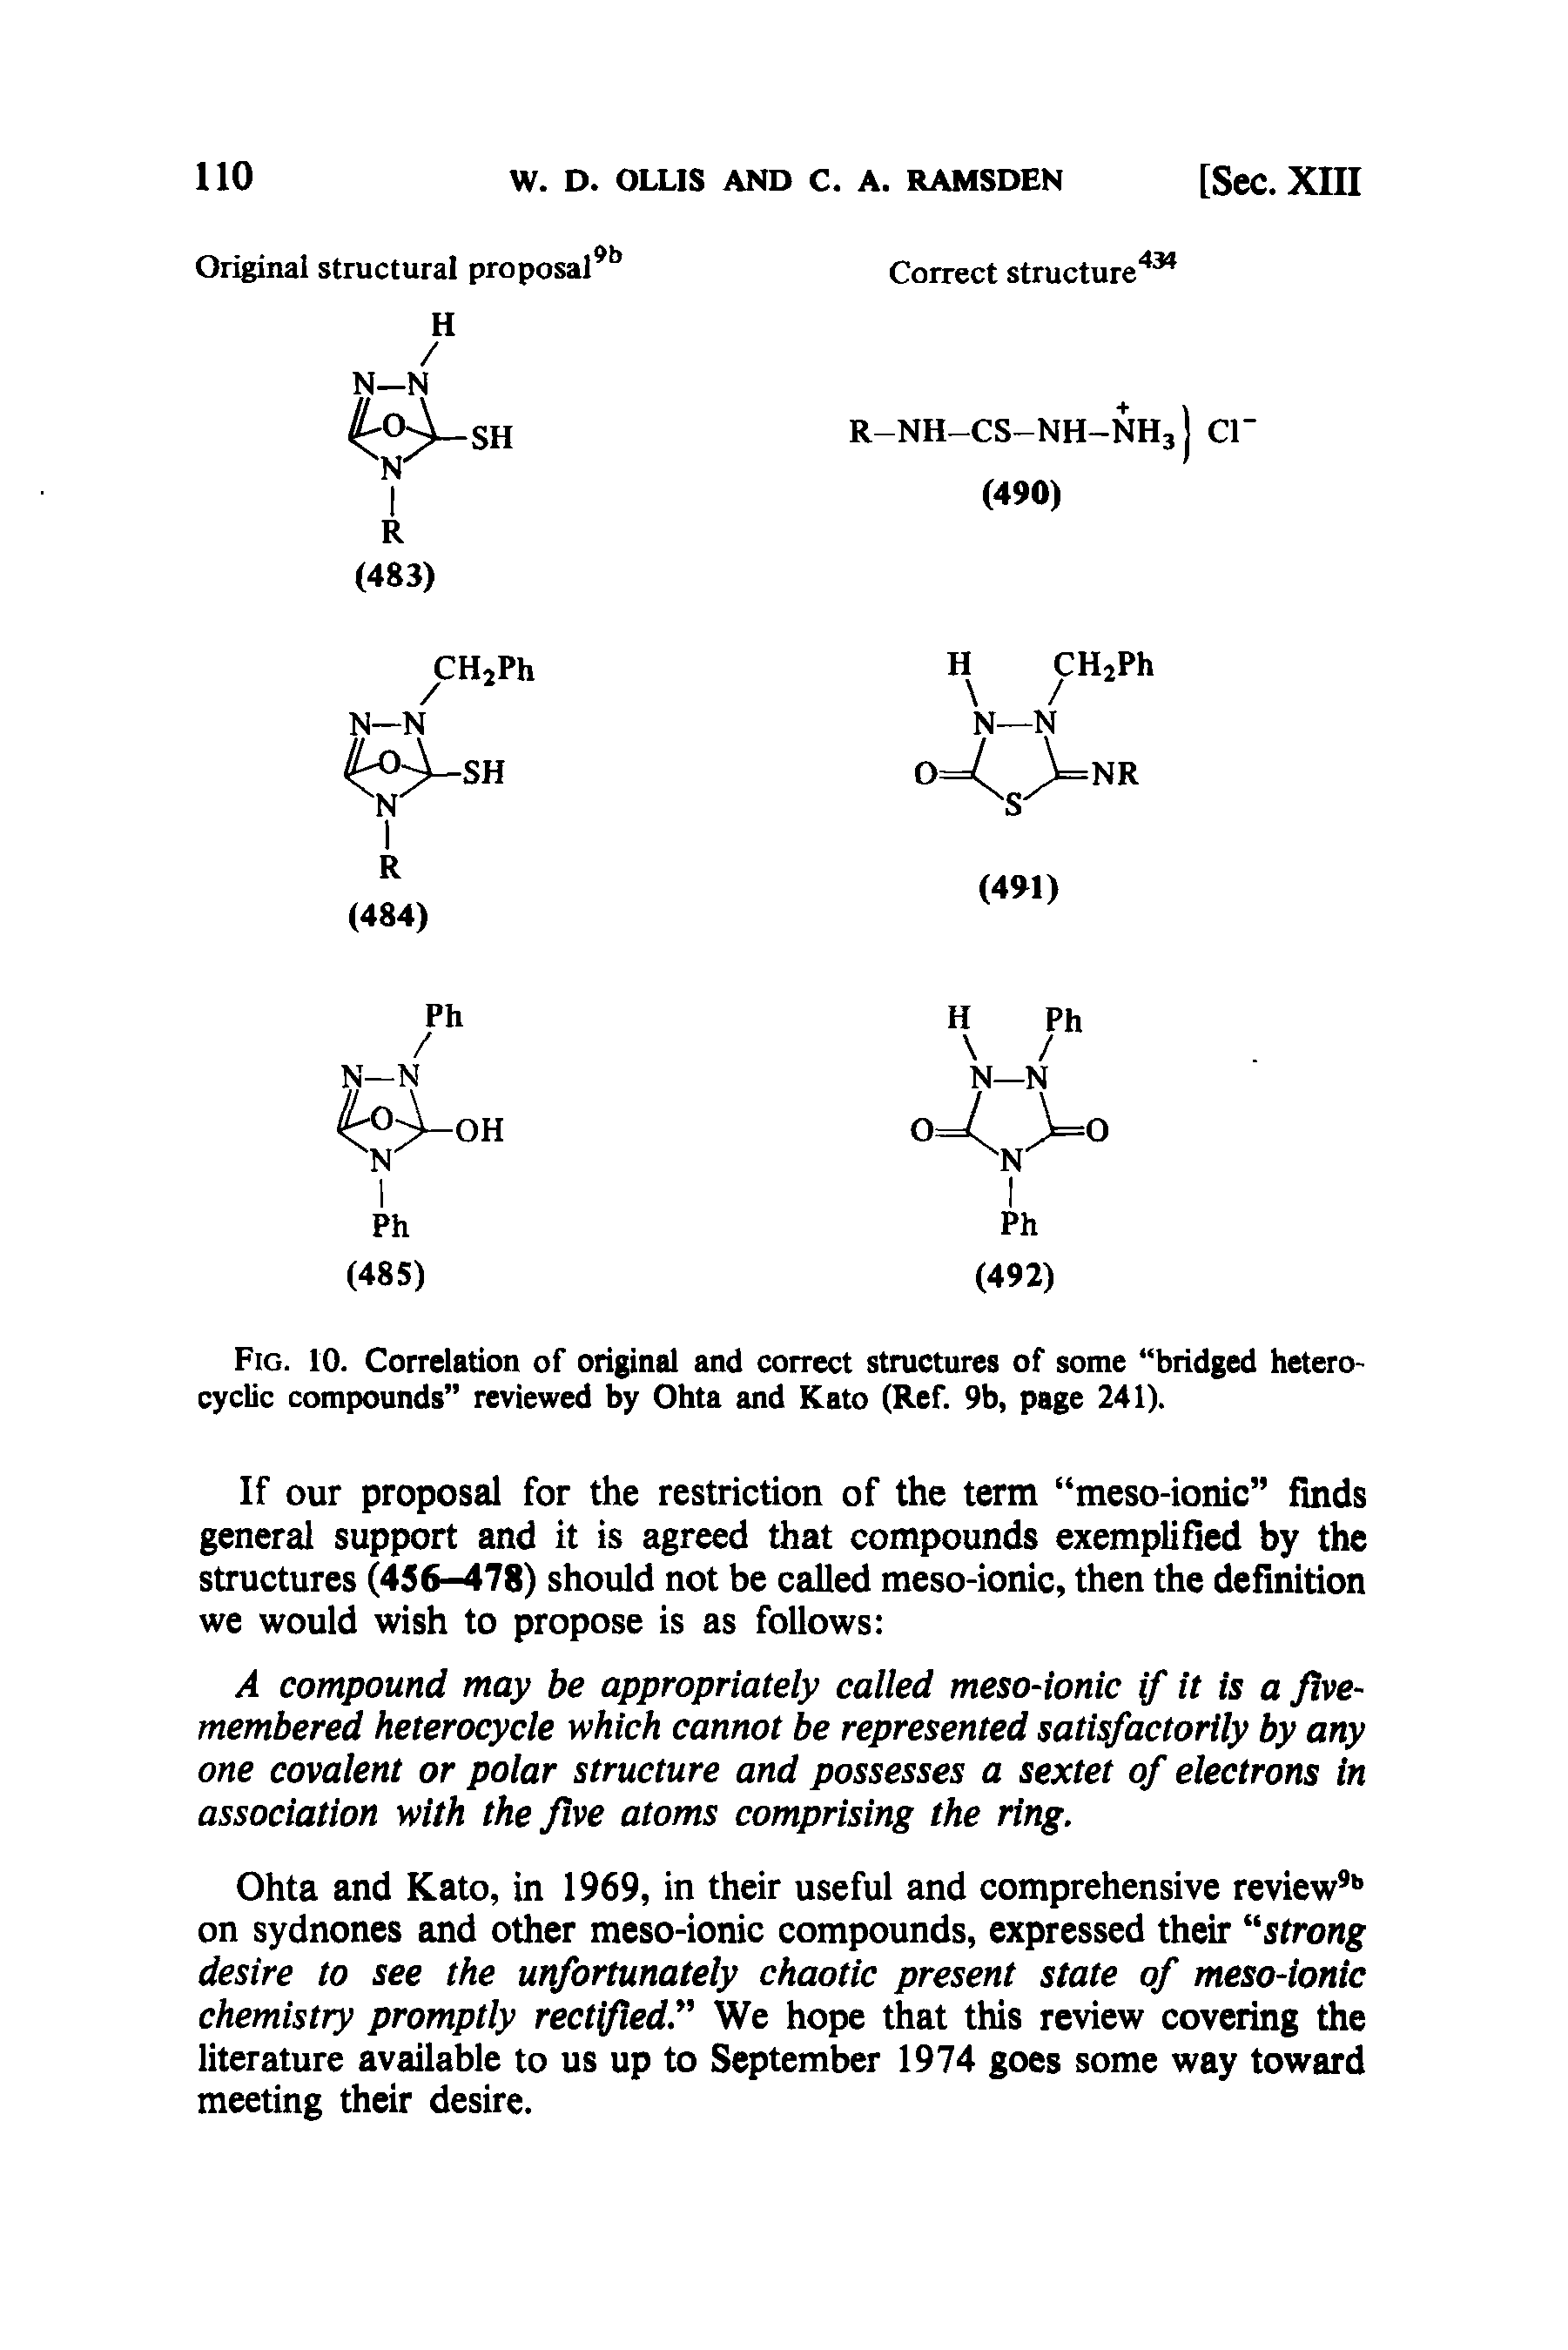 Fig. 10. Correlation of original and correct structures of some bridged heterocyclic compounds reviewed by Ohta and Kato (Ref. 9b, page 241).